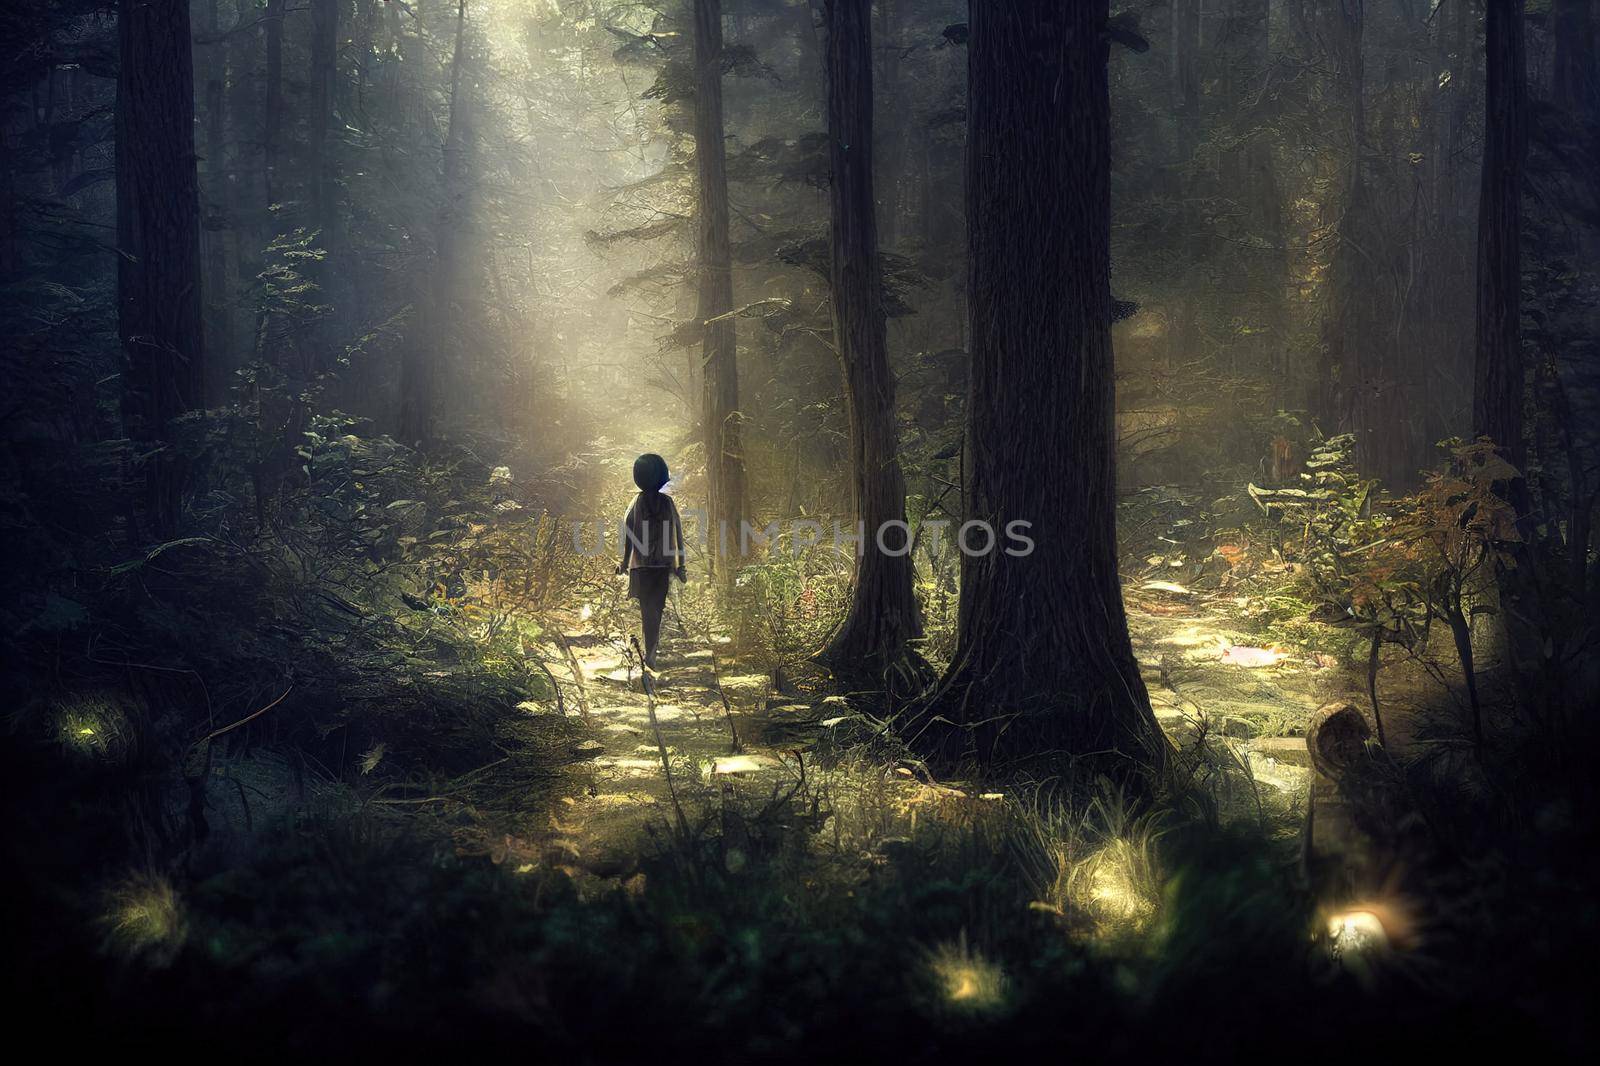 Lost in the woods. High quality illustration